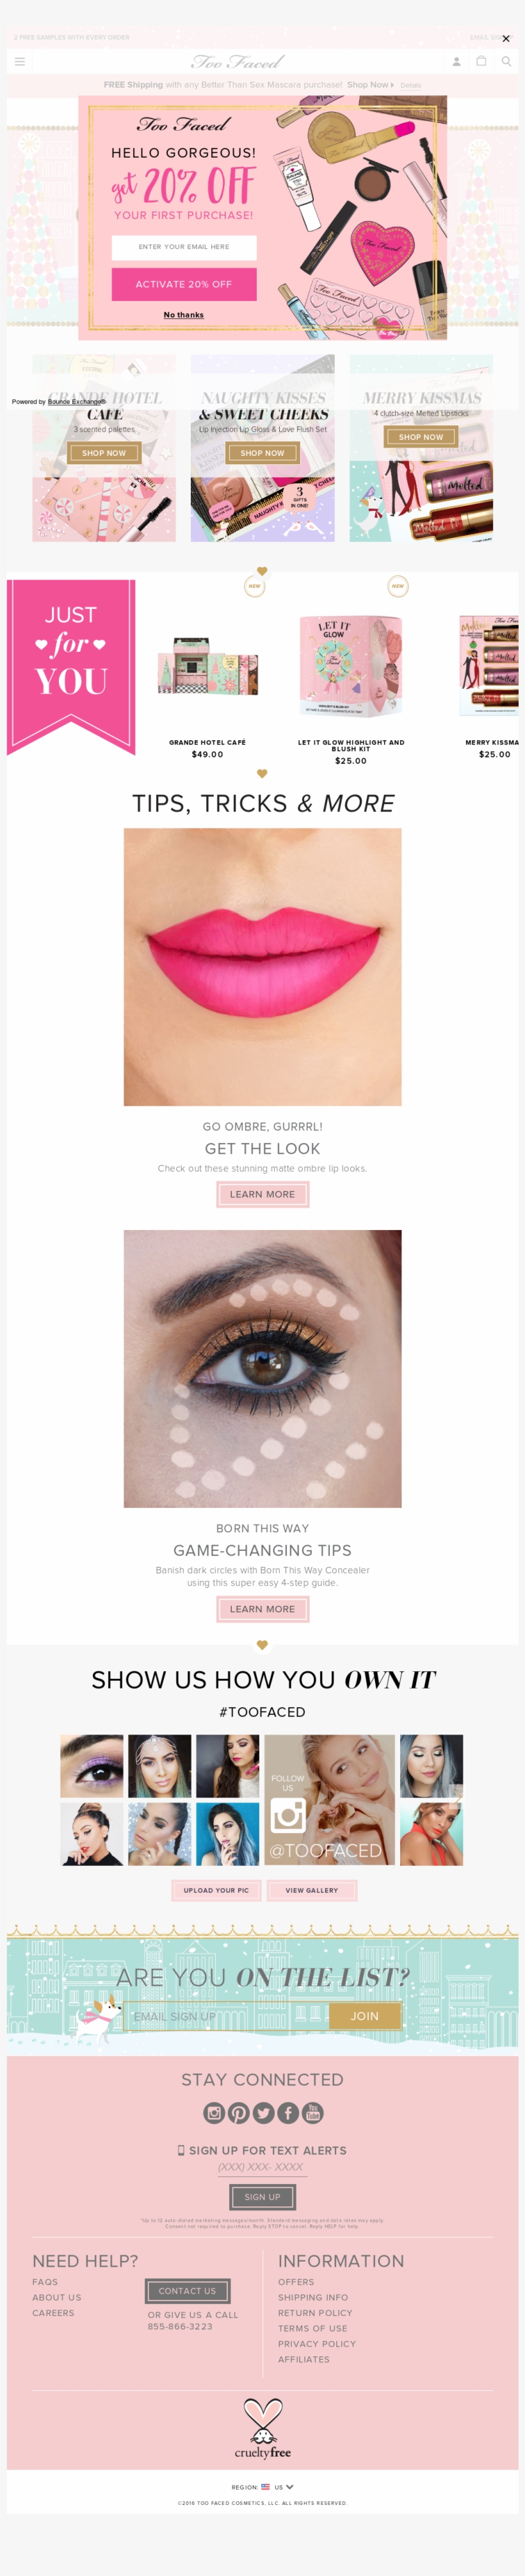 Too Faced Cosmetics Competitors, Revenue And Employees - Eye Liner, transparent png #5046880